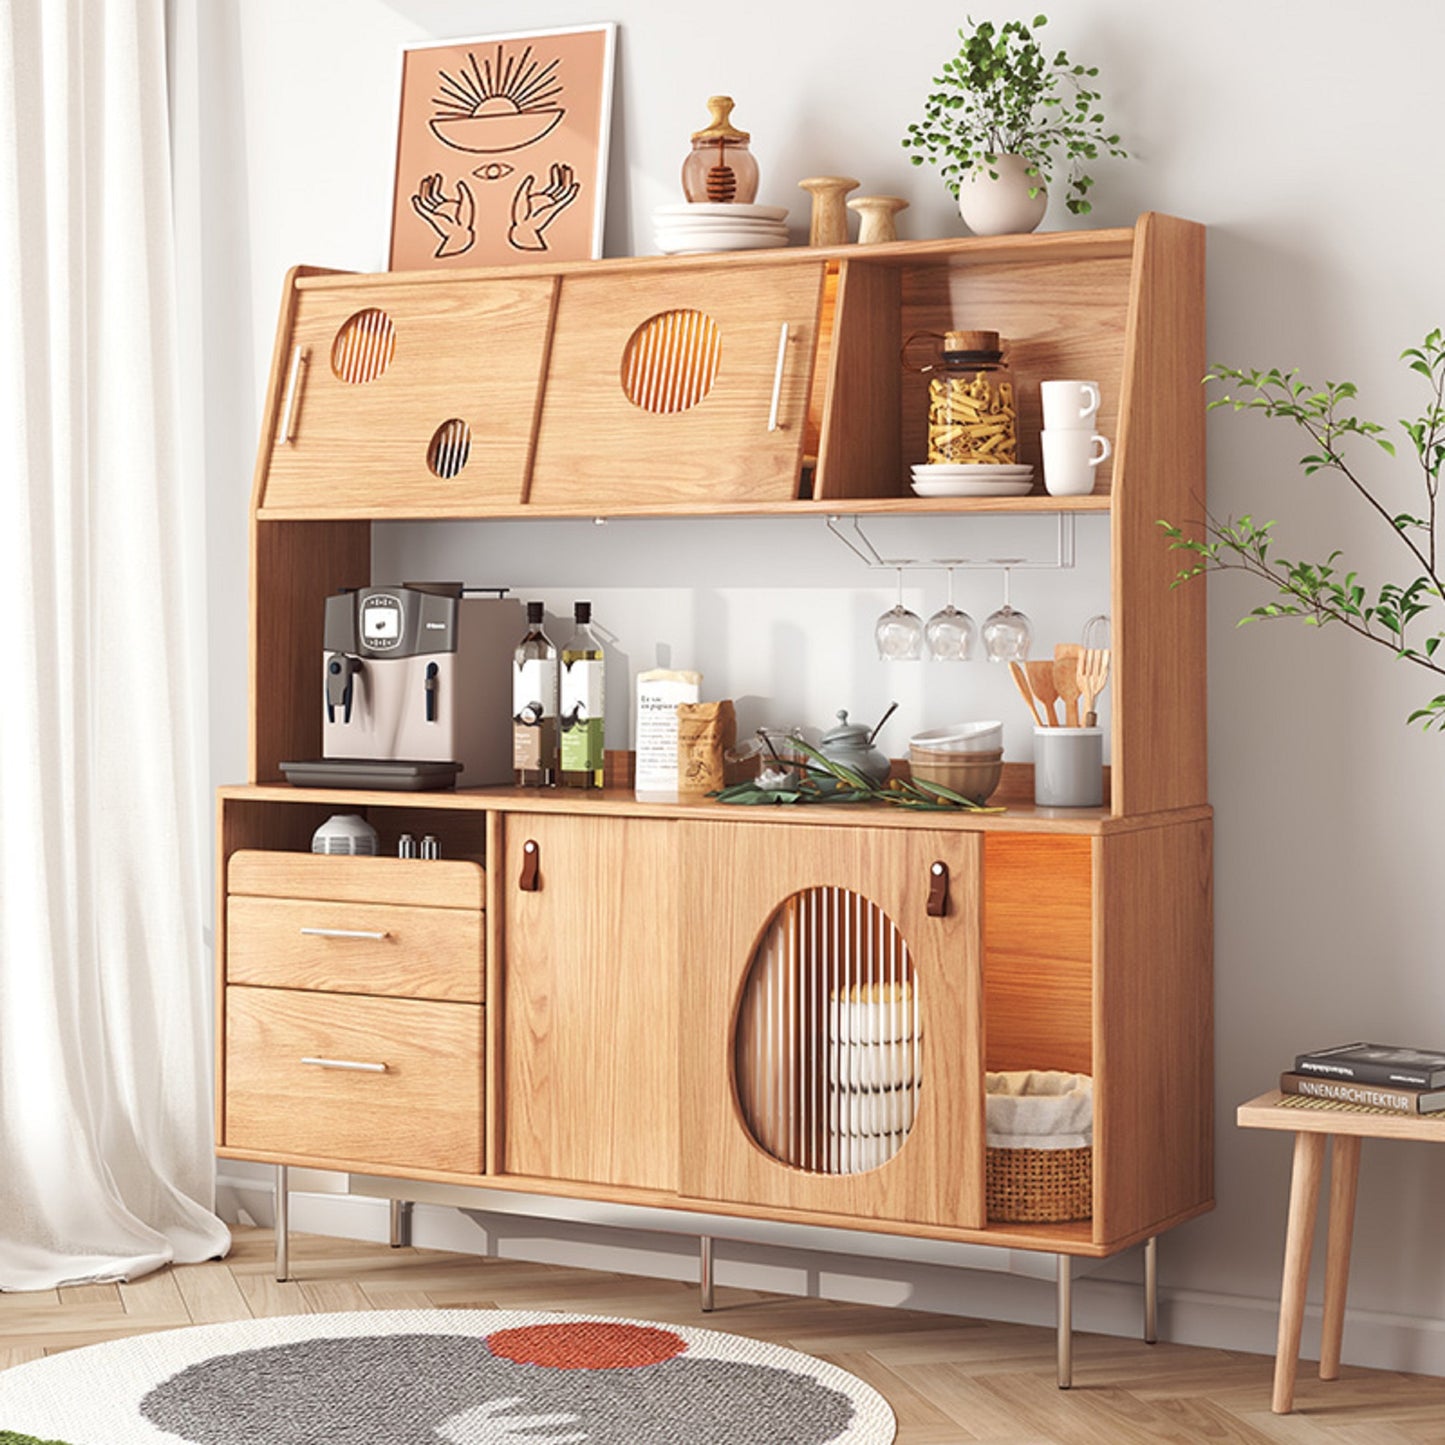 JASIWAY Solid Wood Wooden Sideboard Cabinet